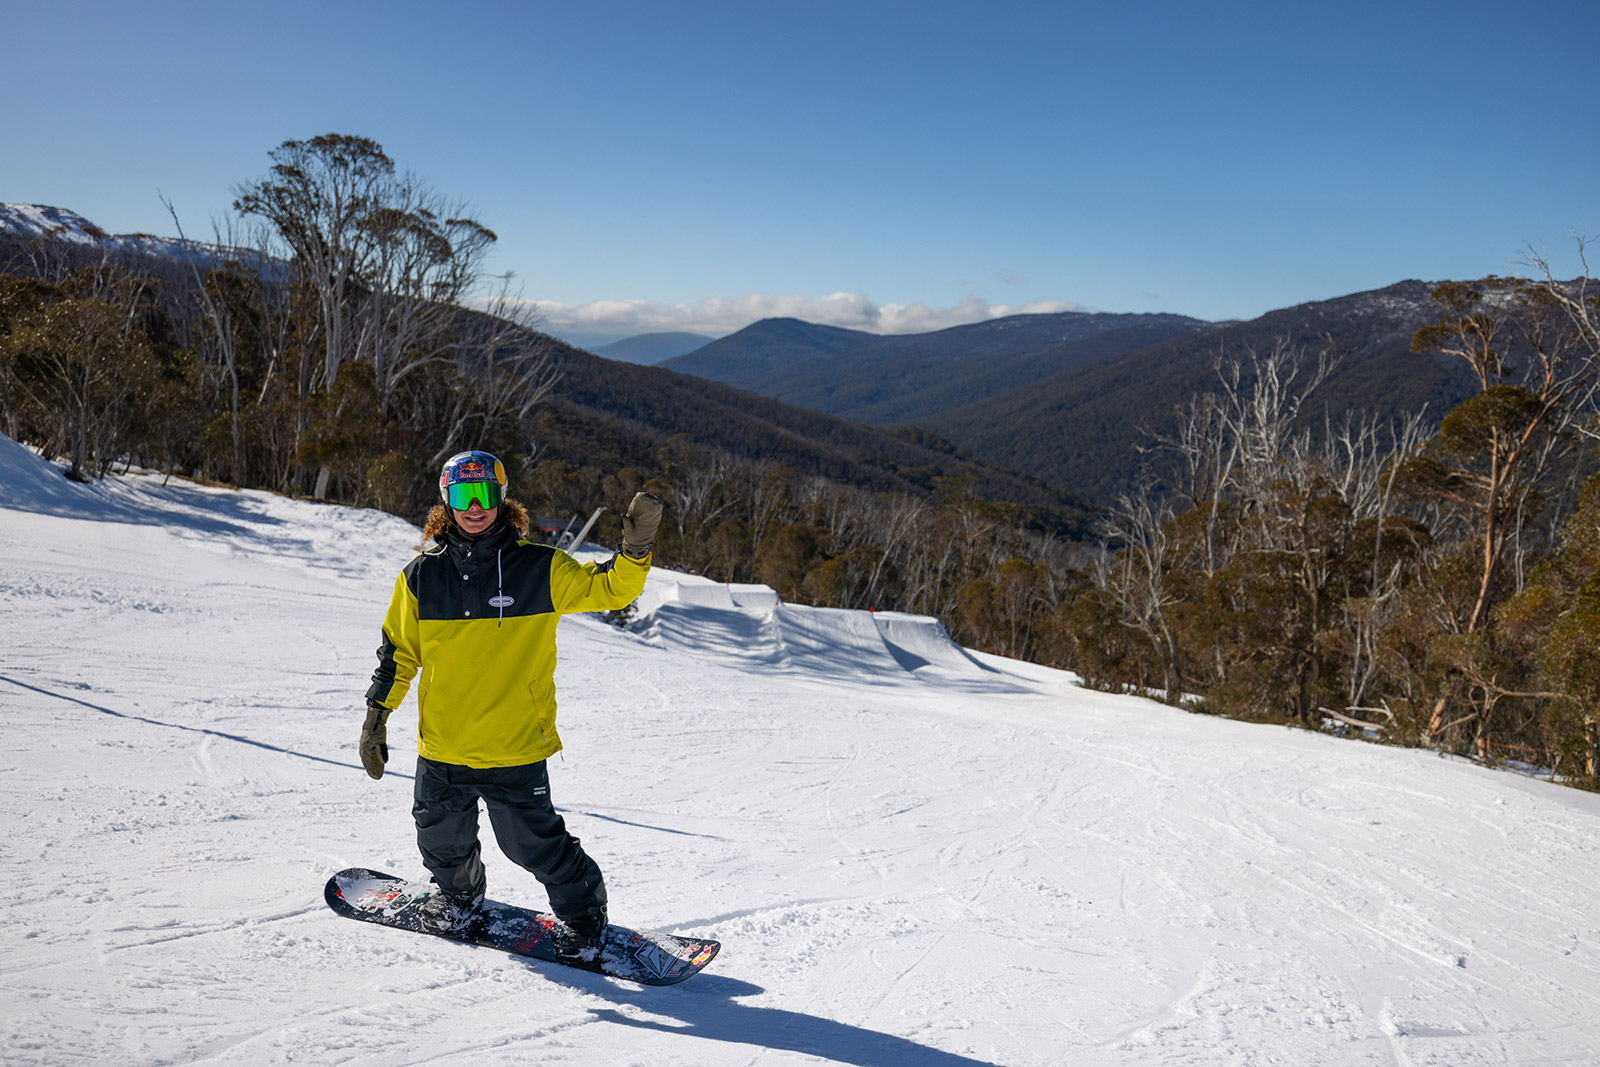 ride with olympic athlete valentino guseli at thredbo thanks to burton and protect our winters australia